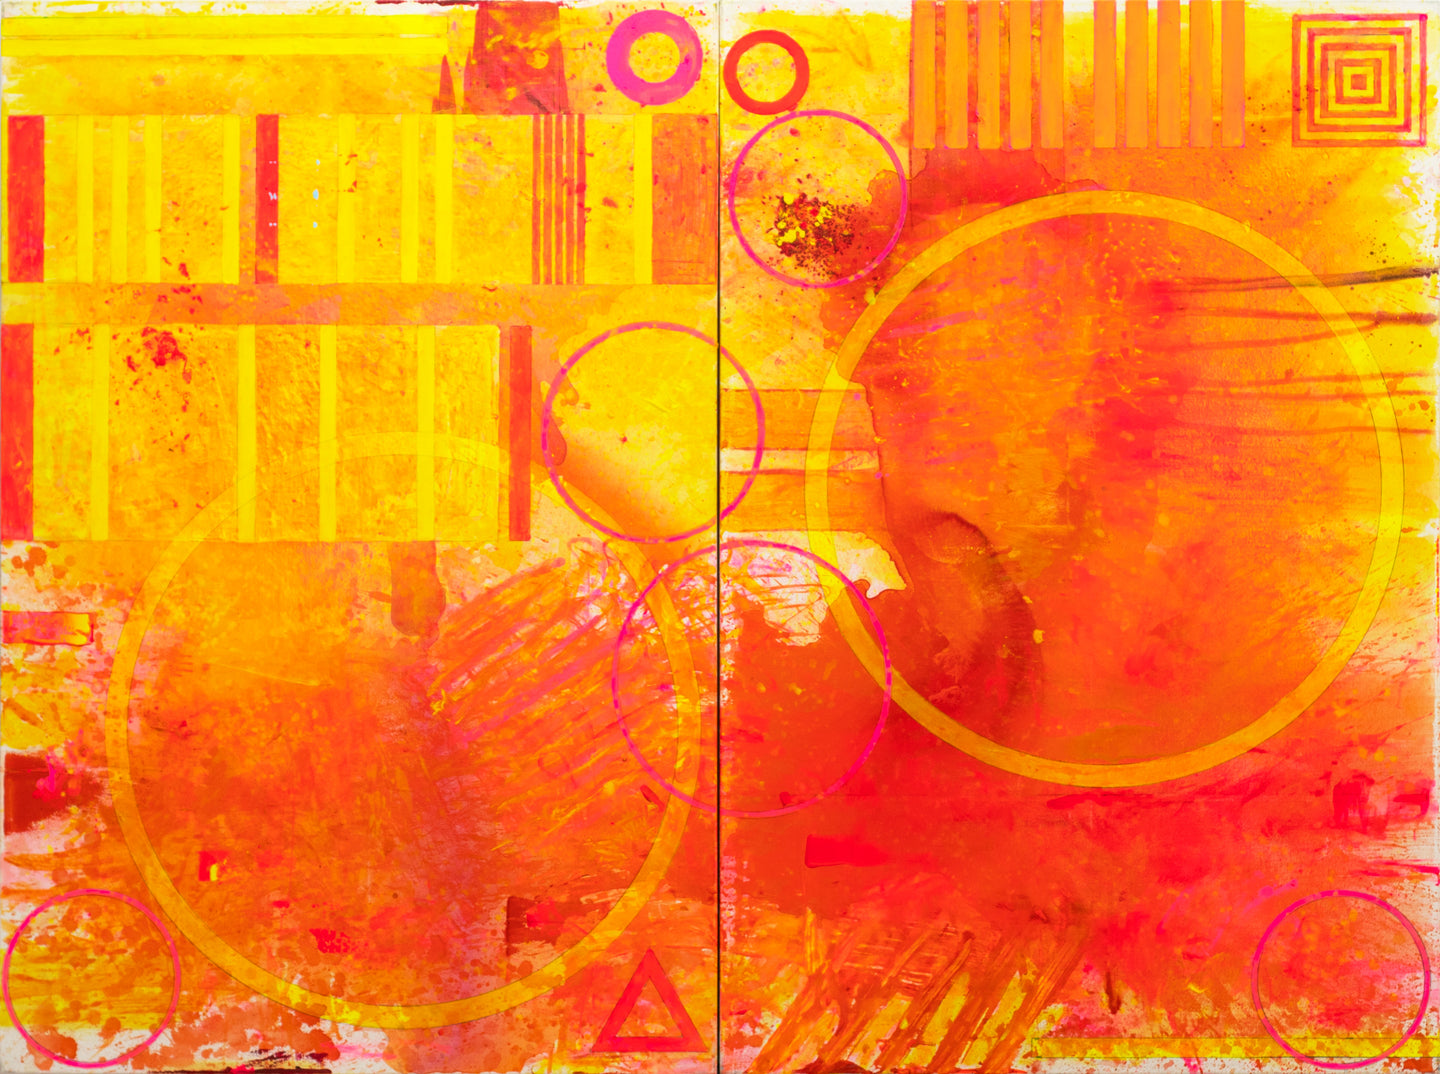 J. Steven Manolis,  Biscayne Bay (Sunrise), 2020, Acrylic on canvas, 2 panels-72 x 96 inches, Geometric Abstract Art, Miami Wall art For sale at Manolis Projects Art Gallery, Miami Fl